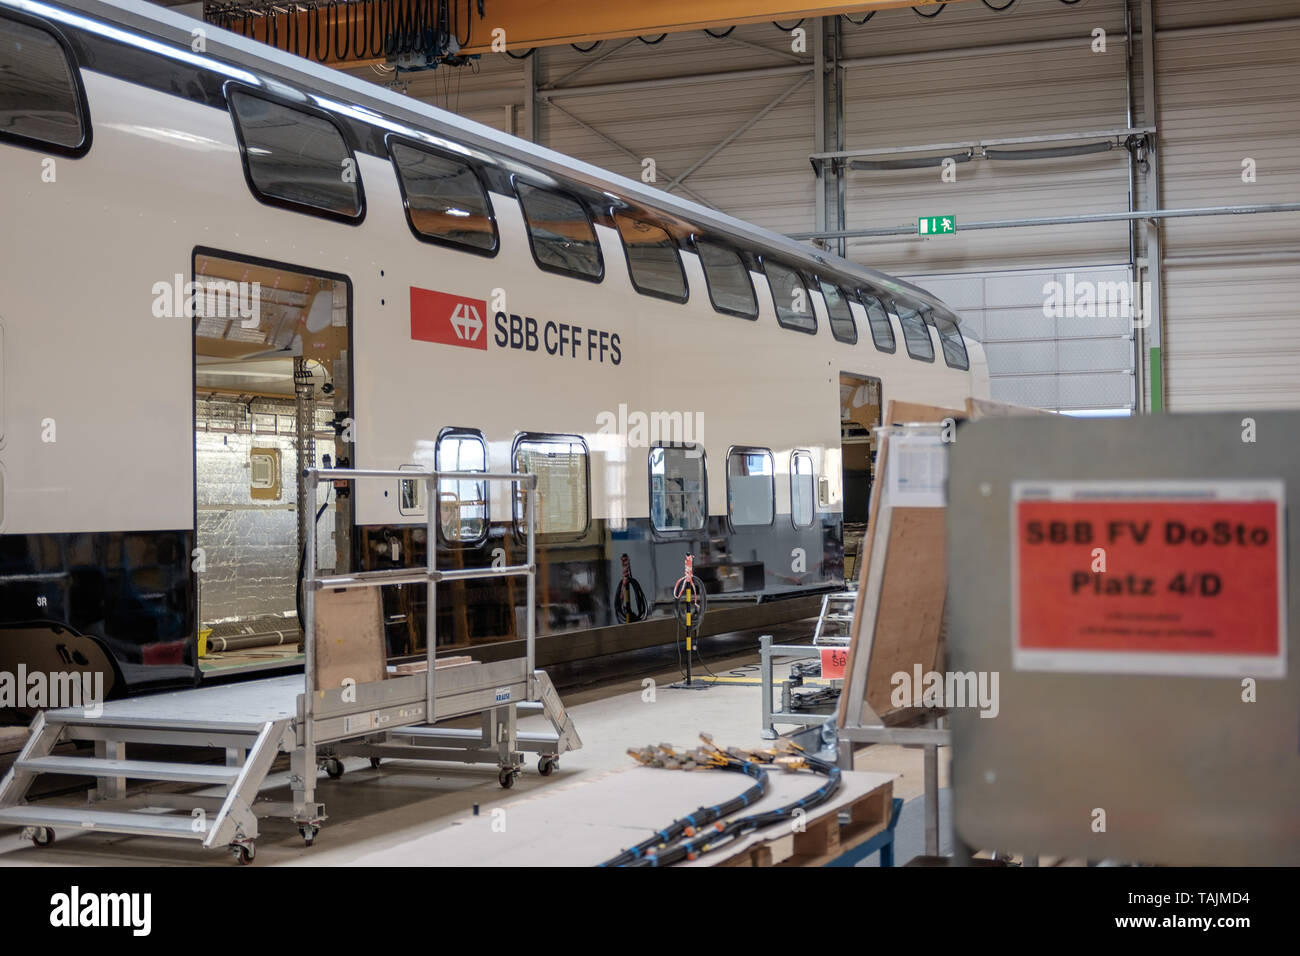 Görlitz, Germany, May 25, 2019 - At the Bombardier plant in Görlitz, new Twindexx double-decker coaches for the Swiss Federal Railways (SBB) are currently under construction. Stock Photo